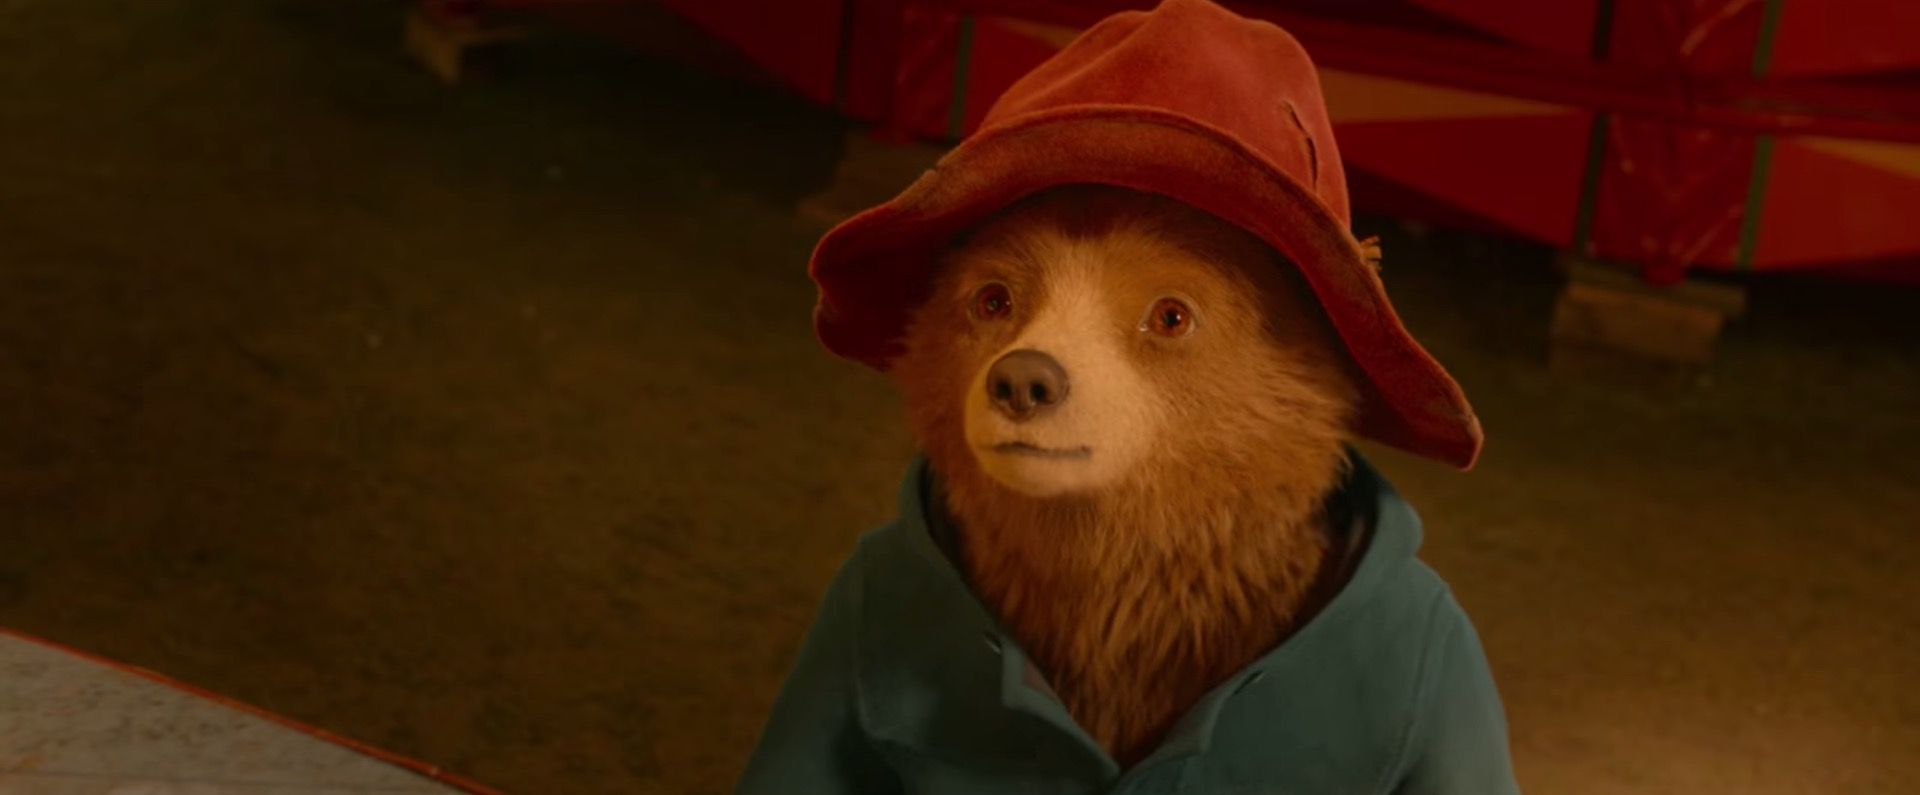 who plays knuckles in paddington 2